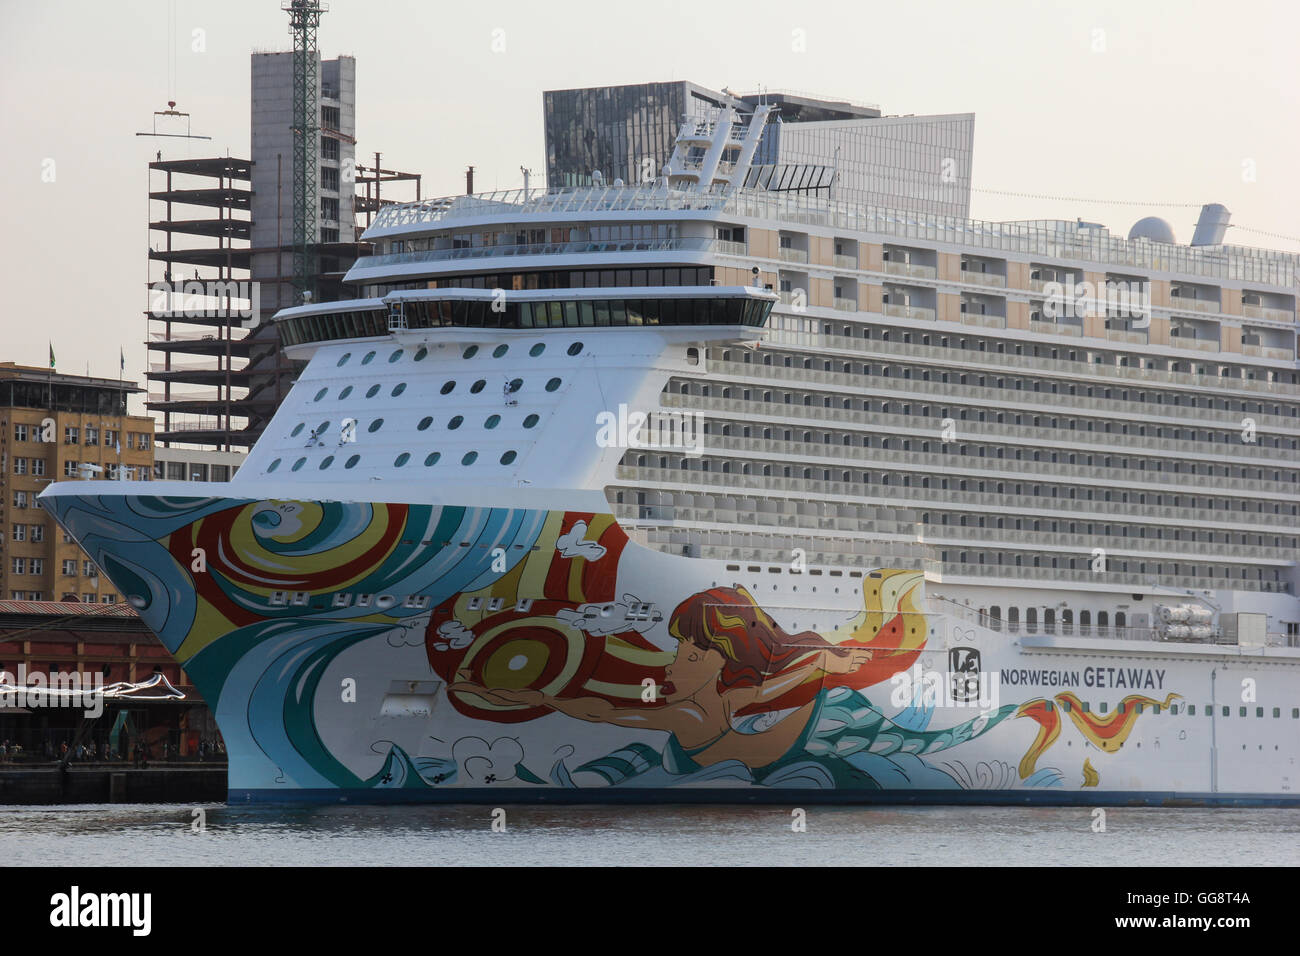 Rio de Janeiro, Brazil, 9 August 2016: Ship Norwegian Getaway is anchored in the port of Rio during the Olympics Credit:  Luiz Souza/Alamy Live News Stock Photo